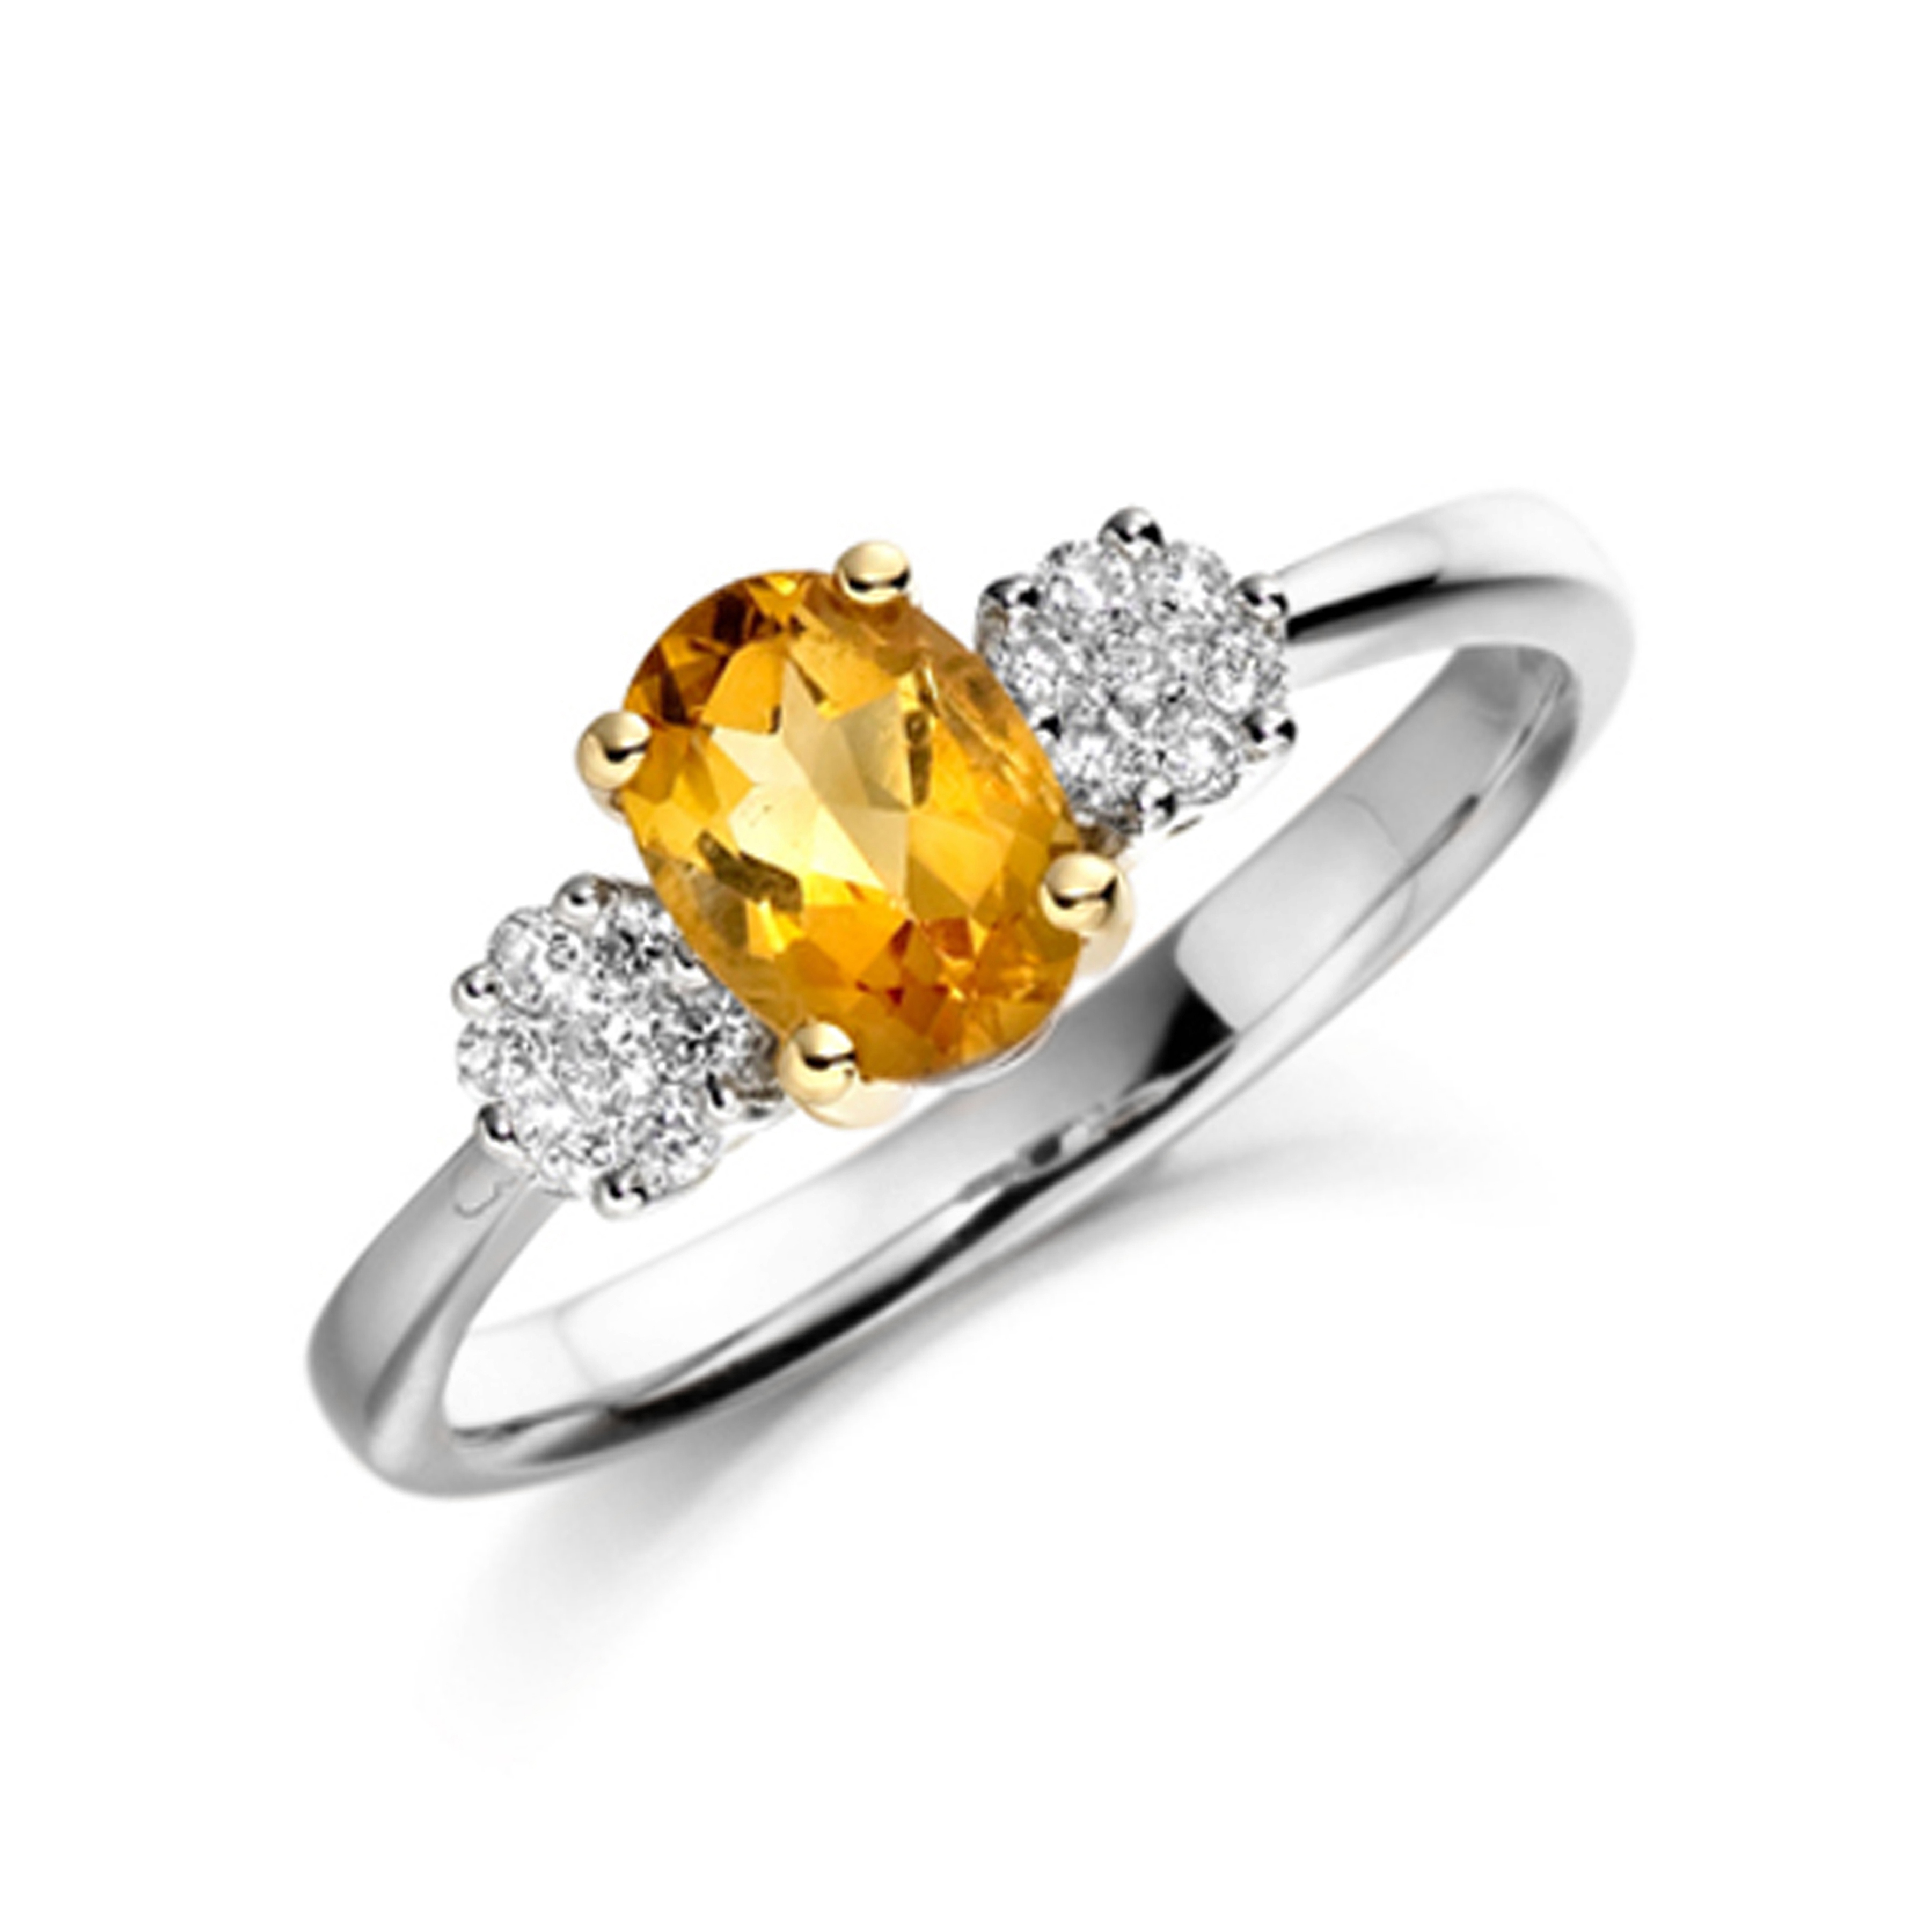 7X5mm Oval Citrine Stones On Shoulder Diamond And Gemstone Engagement Ring